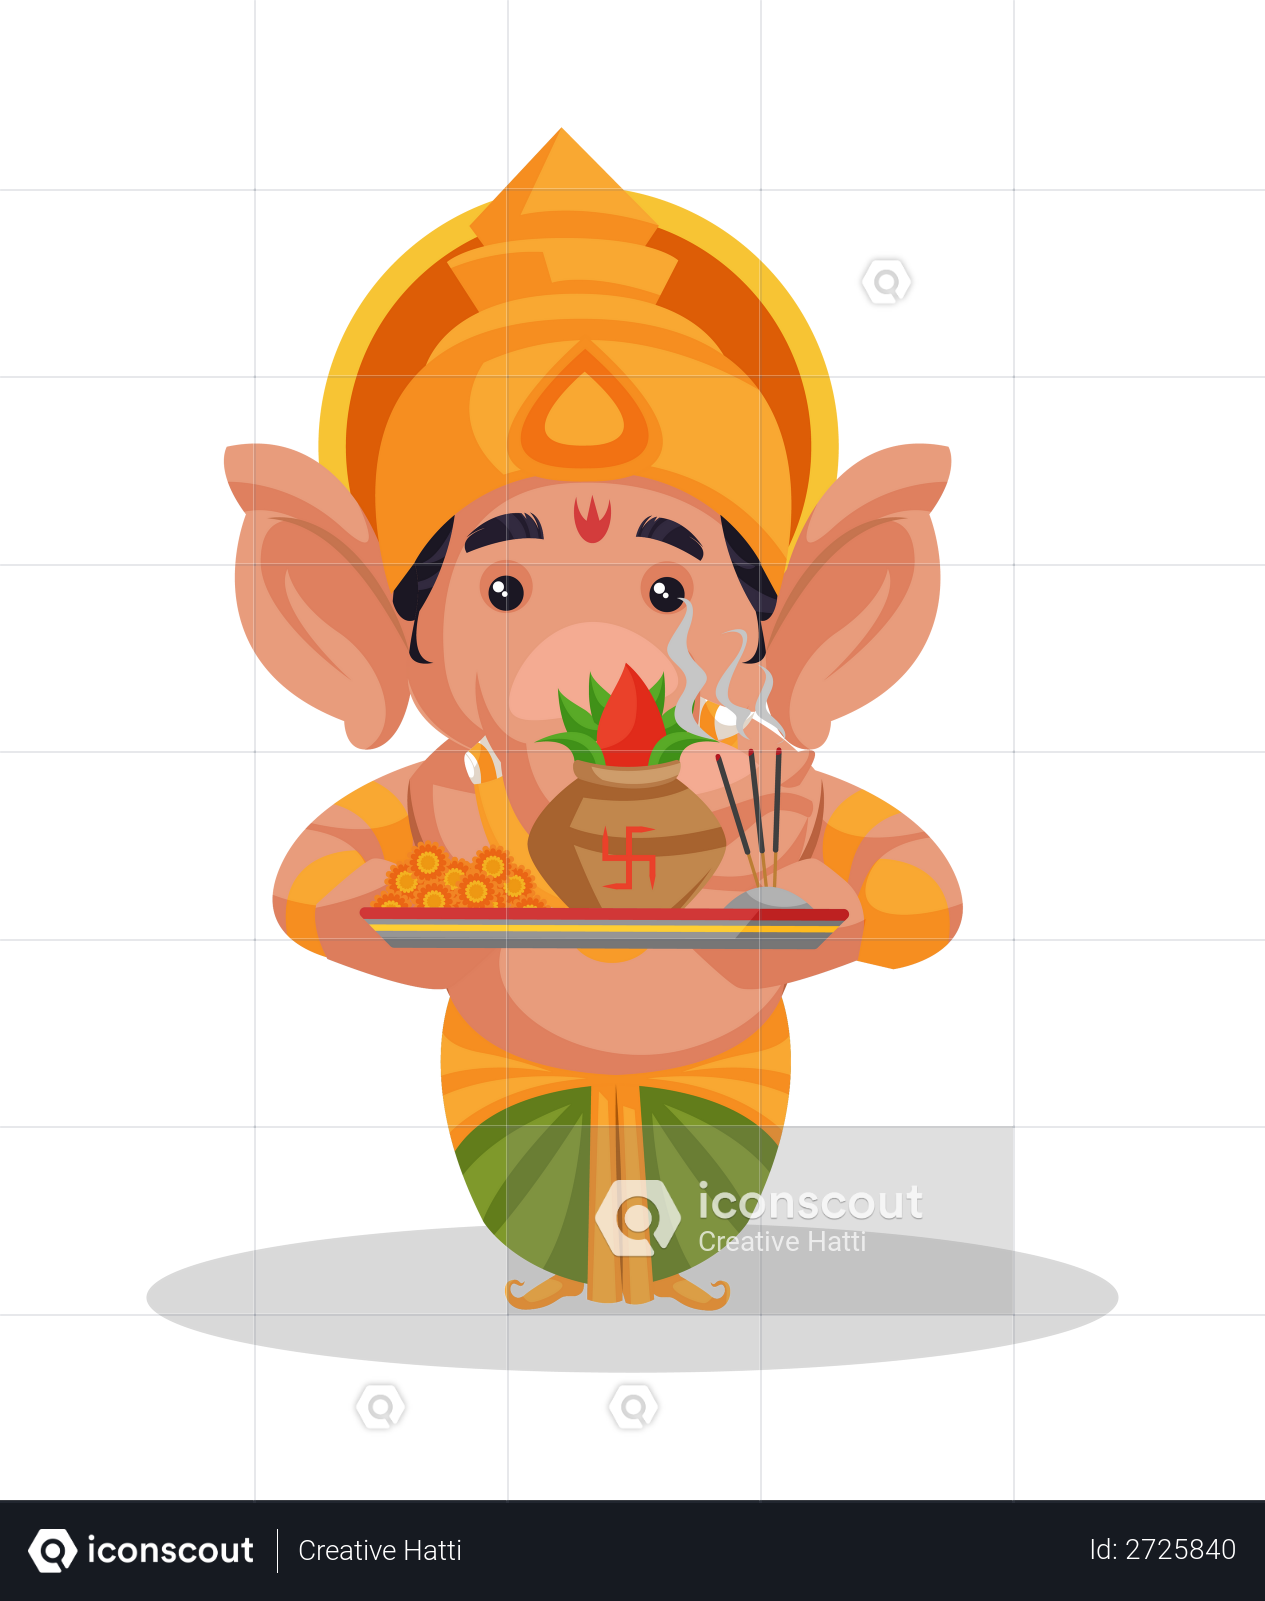 Ganesh Pooja - Lord Ganesh Png Hd Clipart - Large Size Png Image - PikPng